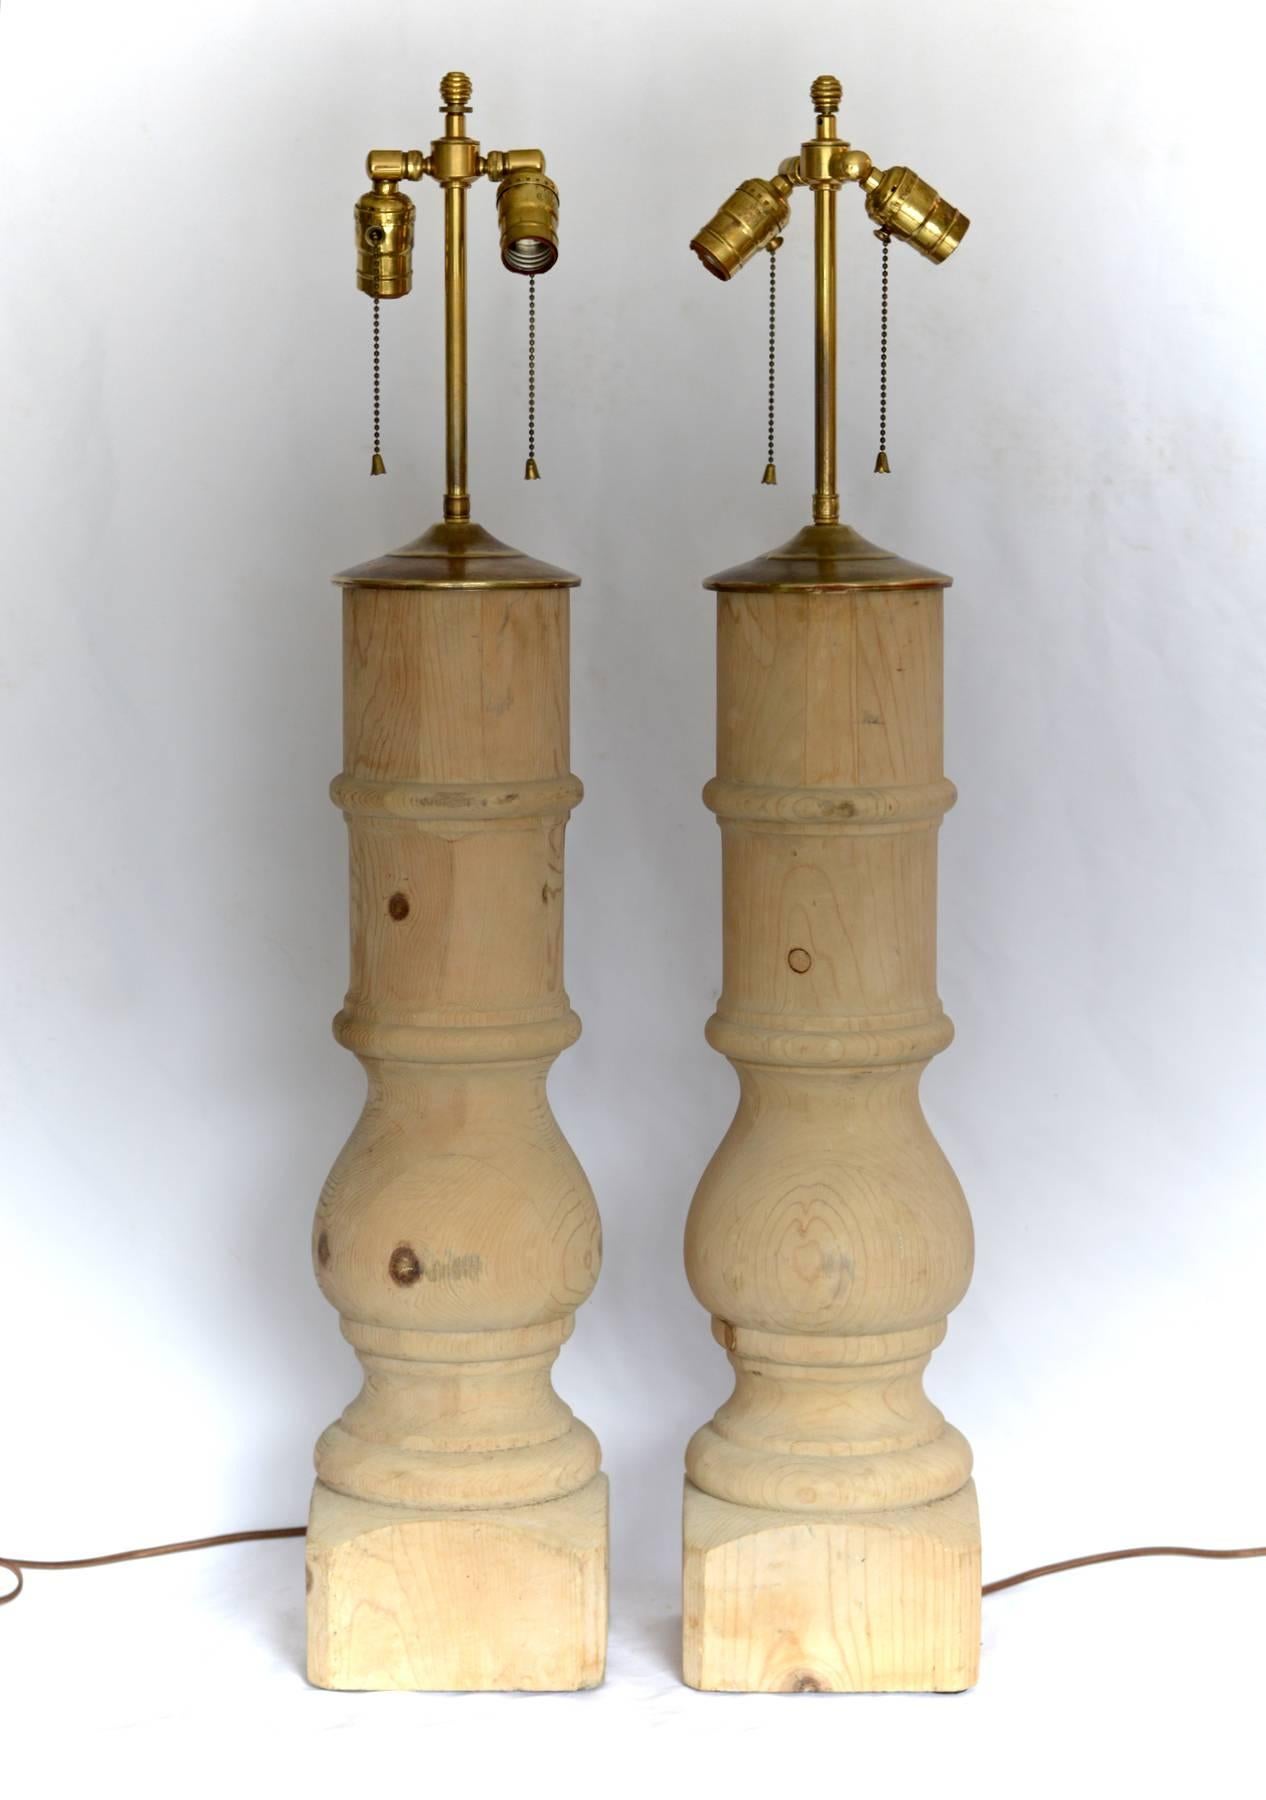 A good looking pair of Architectural lamps of bleached pine. Killer large-scale and the warmth of old, smooth wood make these tall table lamps proven winners in a wide range of interiors.